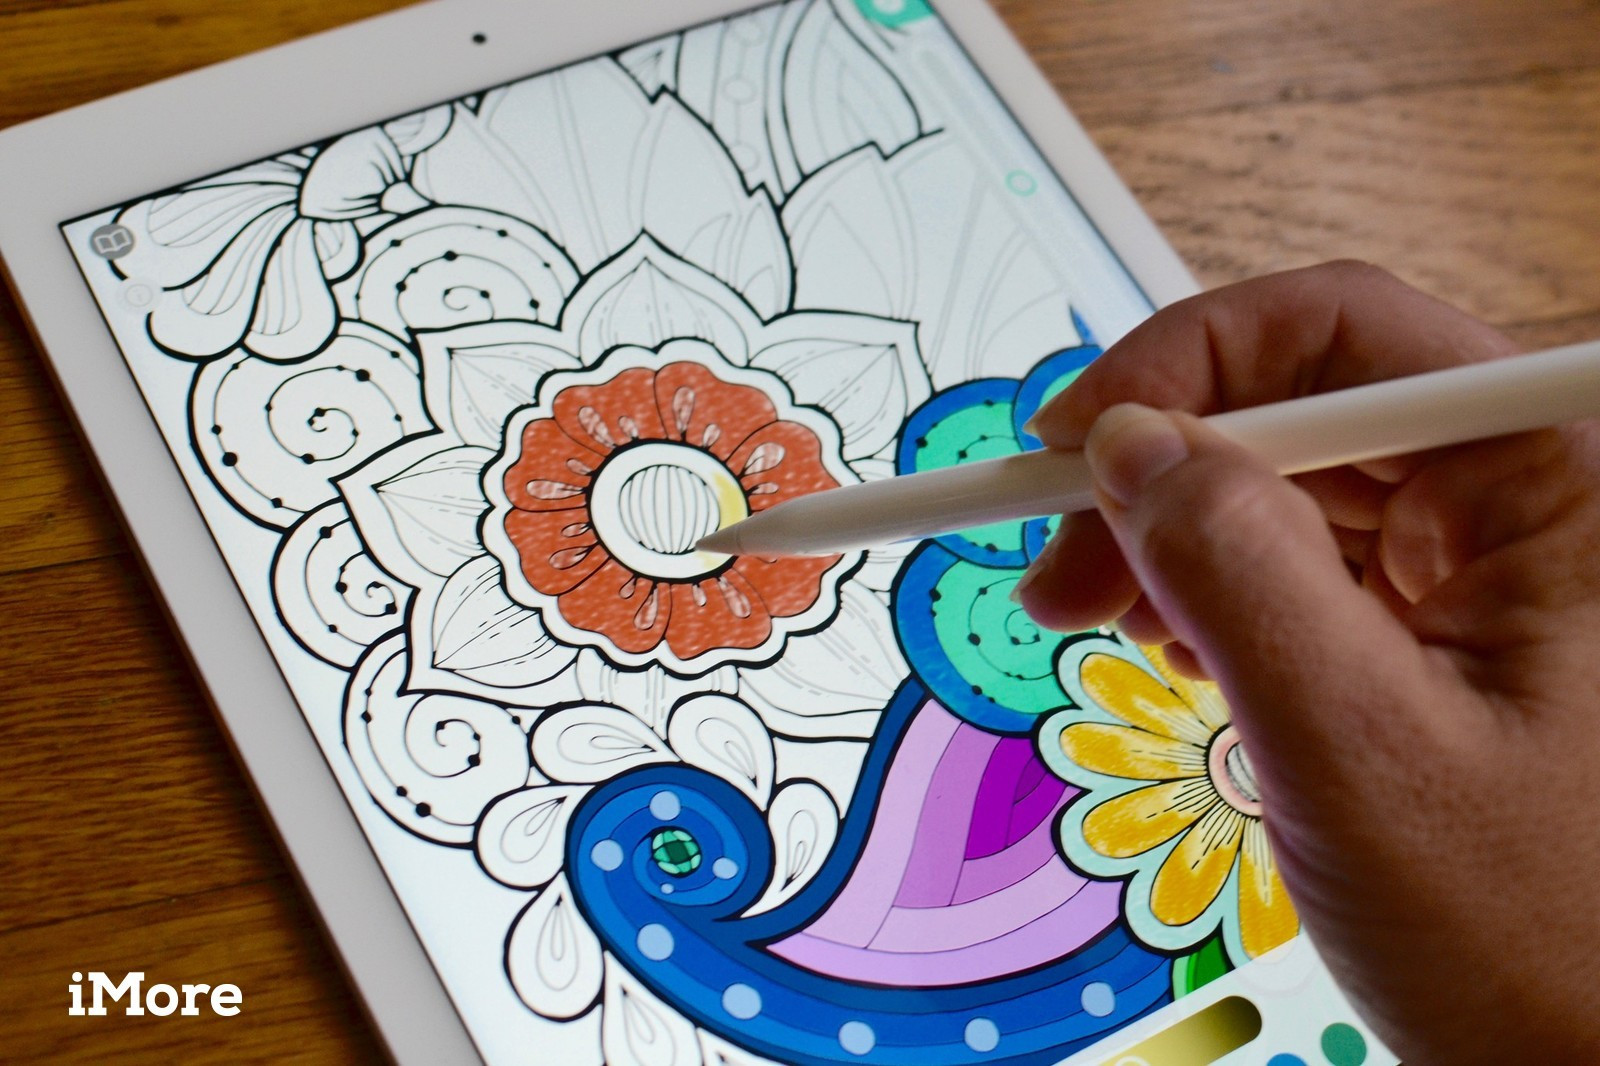 Coloring Books For Adults Apps
 Best Coloring Books for Adults on iPad in 2020